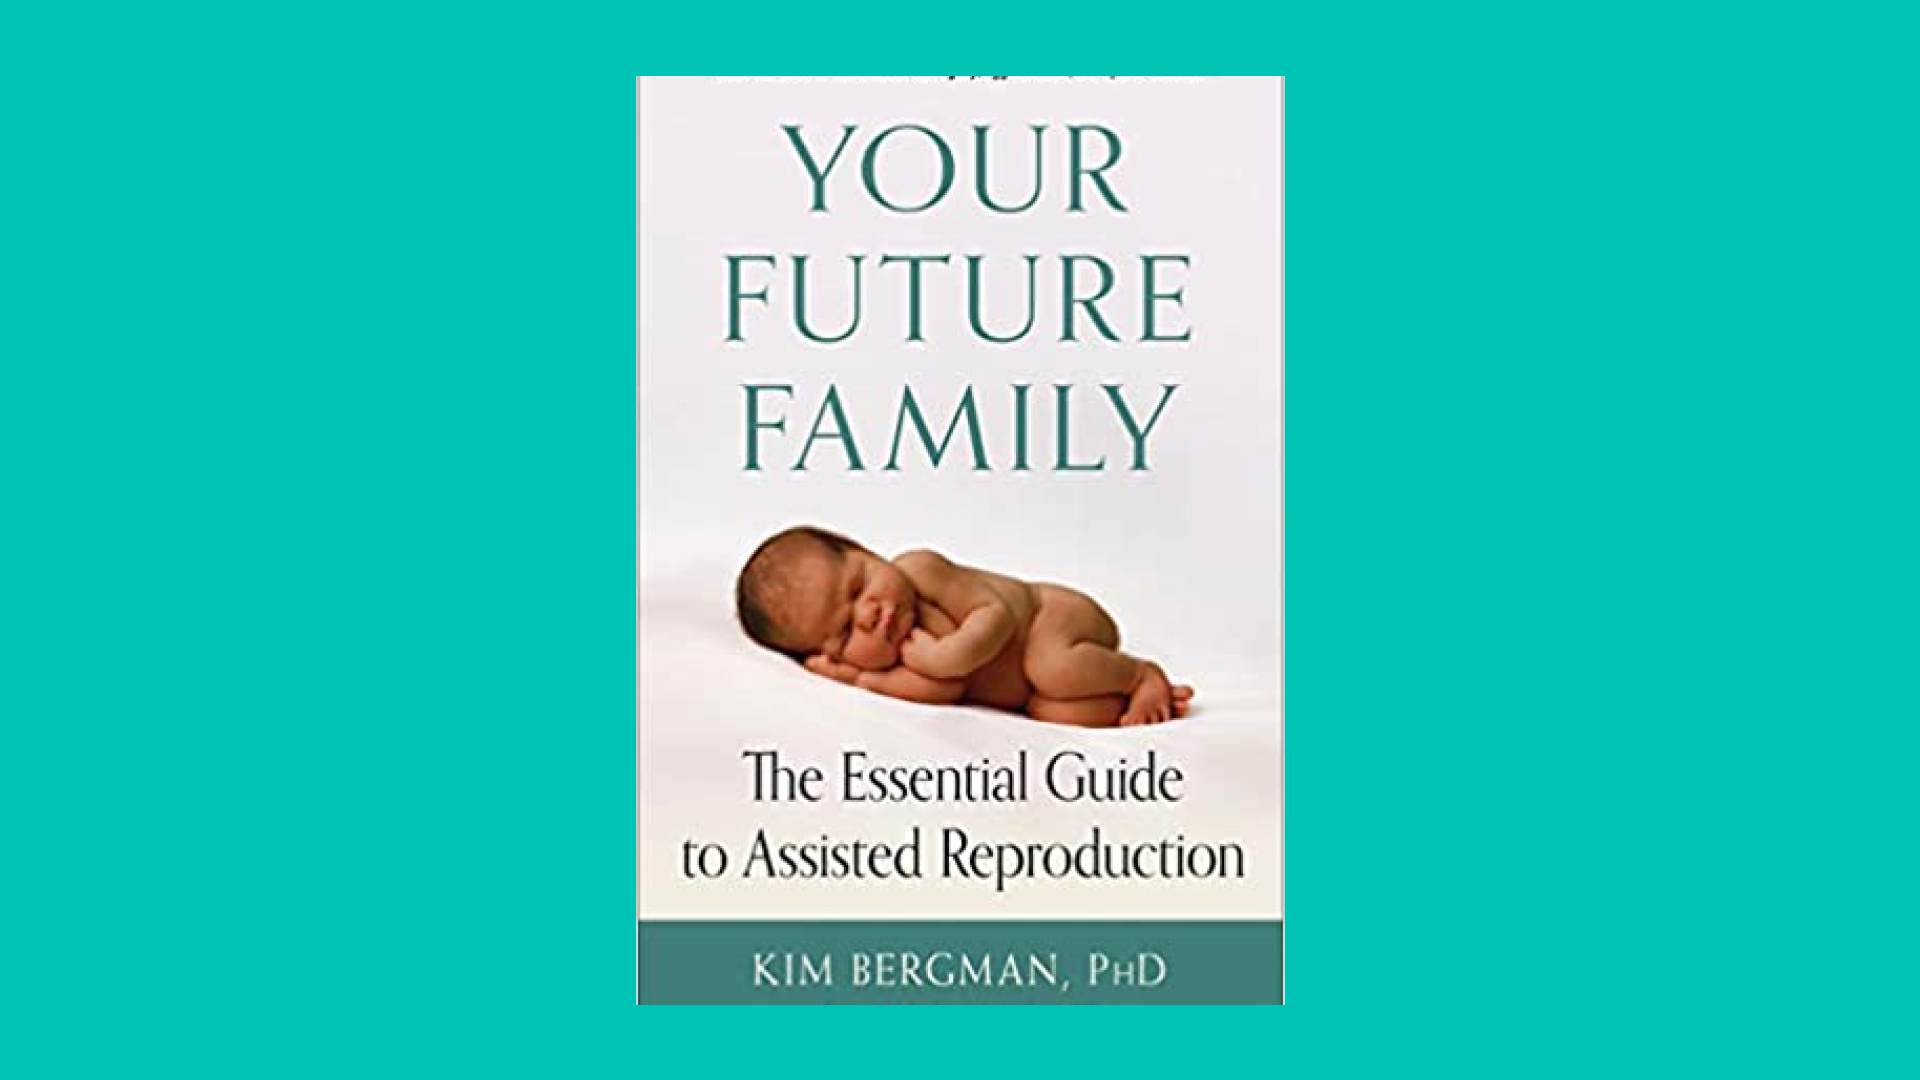 “Your Future Family: The Essential Guide to Assisted Reproduction” by Kim Bergman PhD